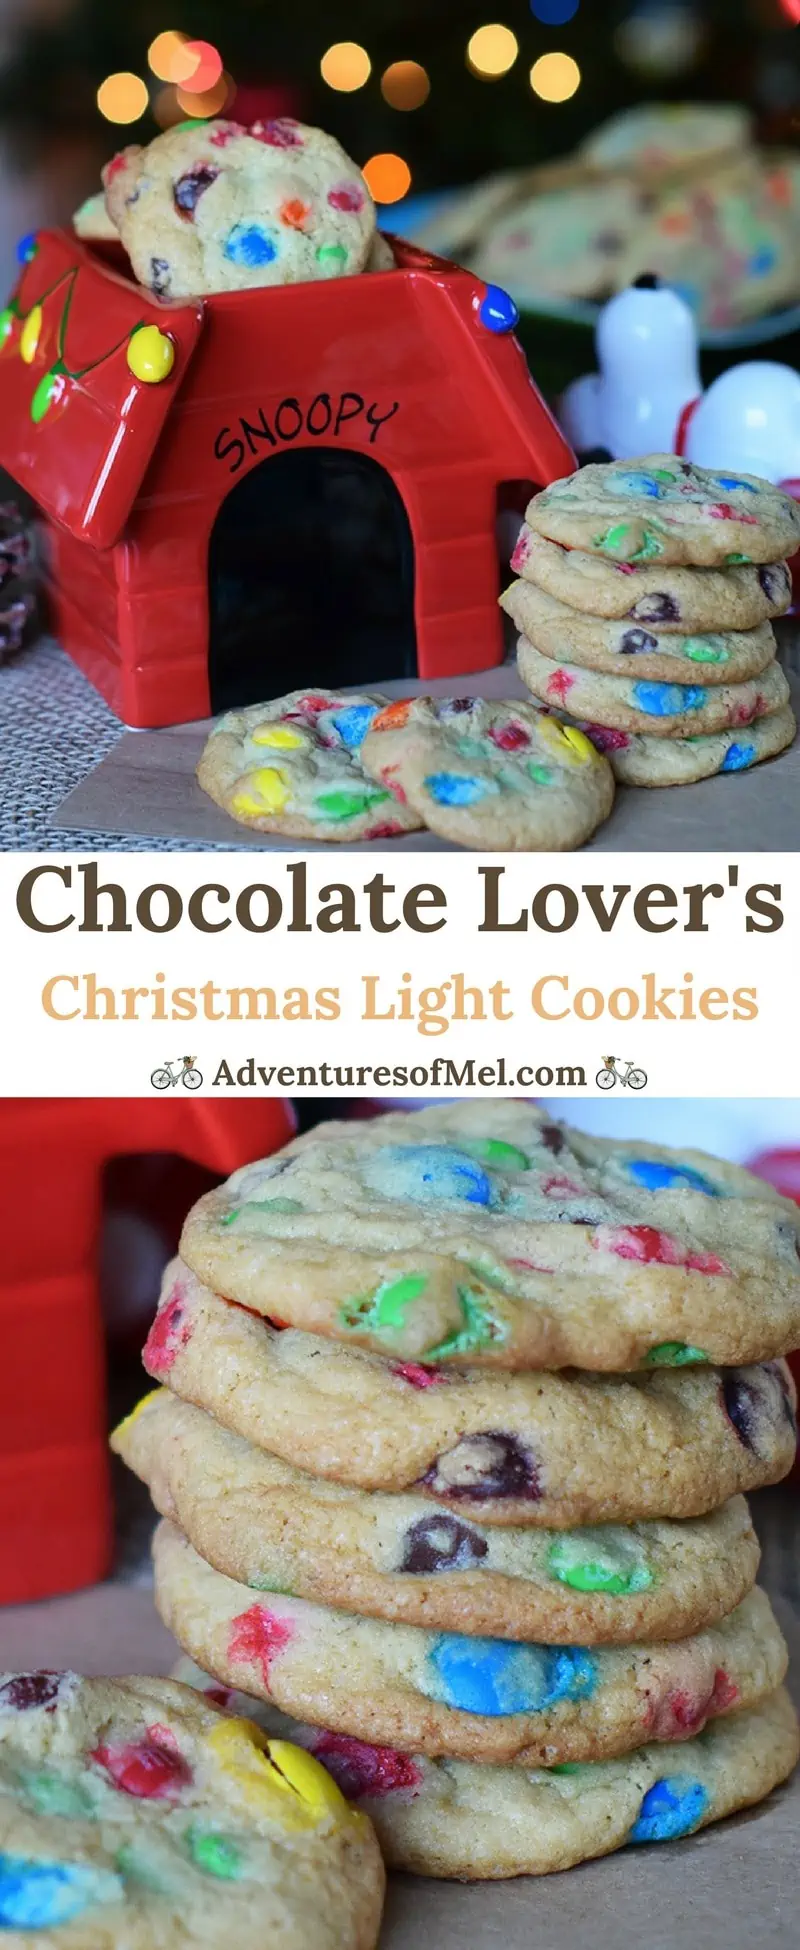 How to make a scrumptious holiday treat, Chocolate Lover’s Christmas Light Cookies. Filled with M&M’s, perfect for a Christmas party dessert!